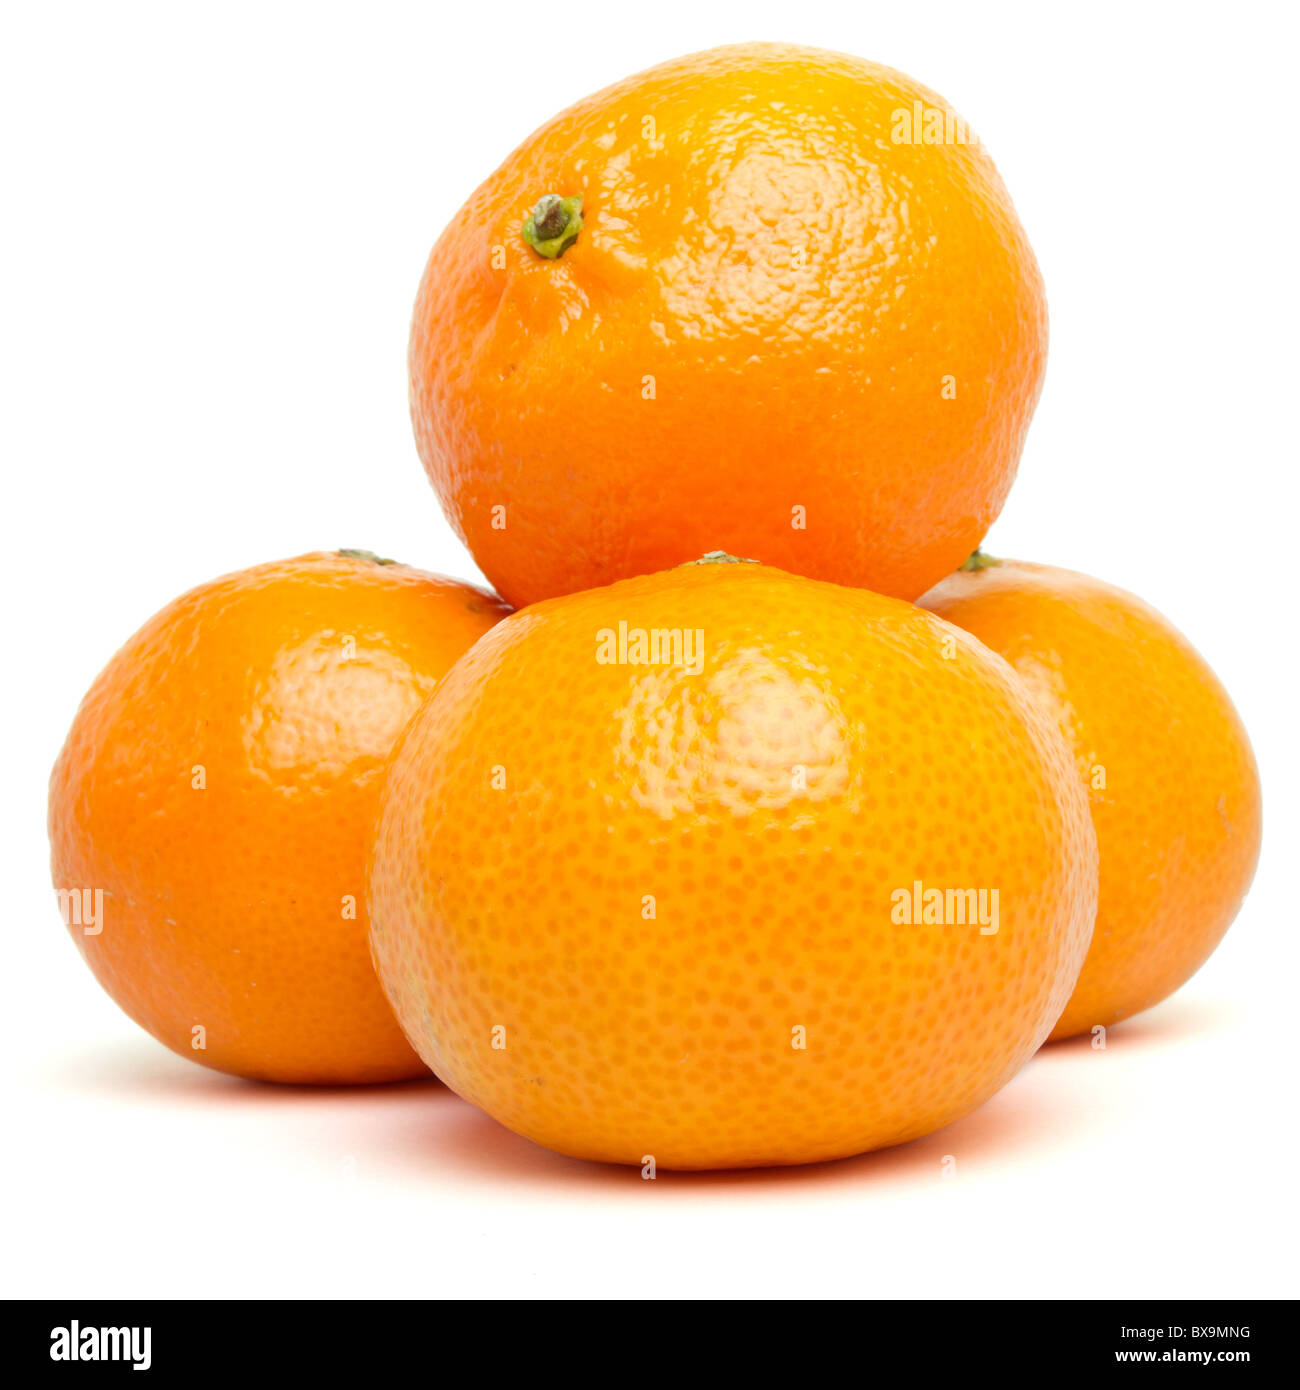 Clementines From Low Perspective Isolated On White Stock Photo Alamy